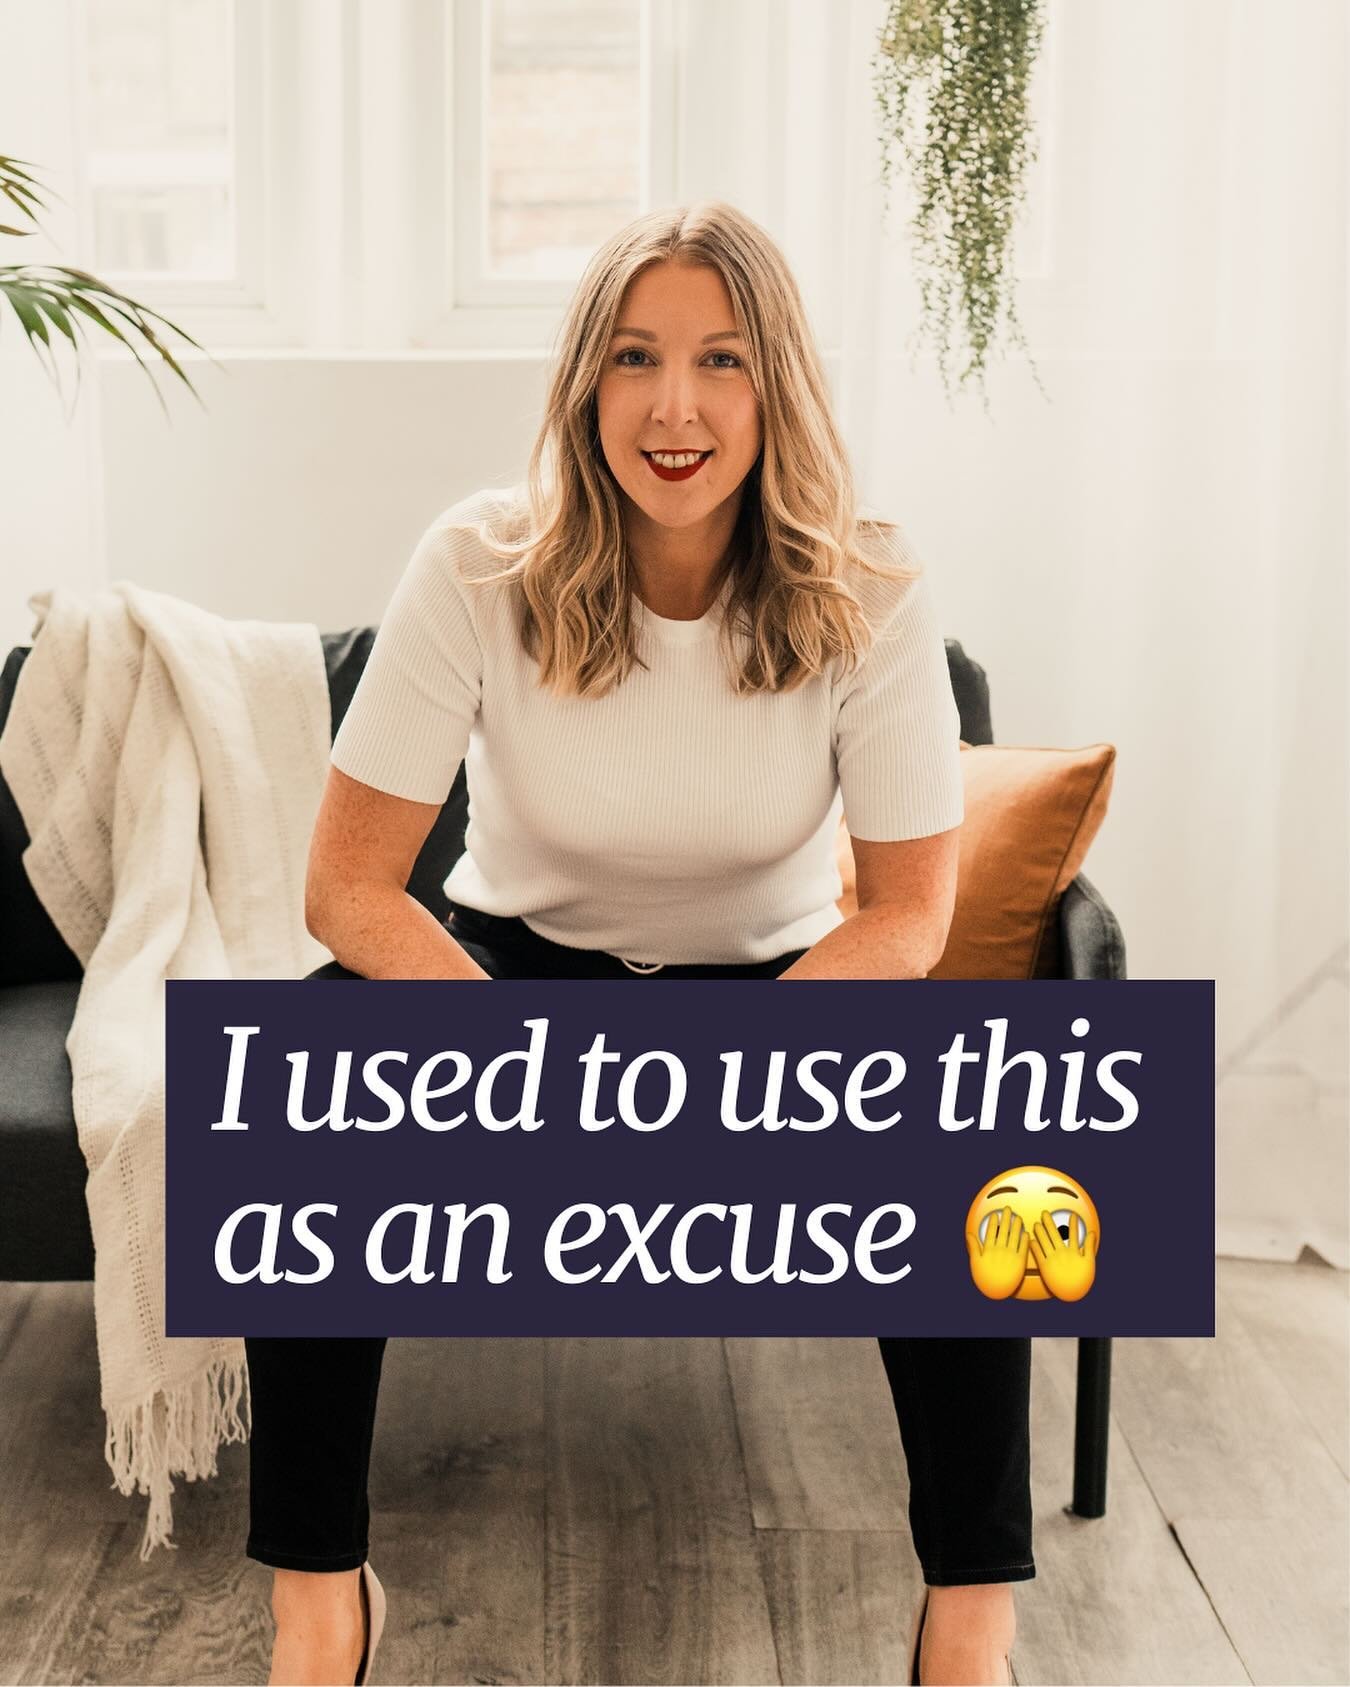 &lsquo;I&rsquo;m too busy with client work.&rsquo; 

But guess what? 

Busy is not an excuse - it&rsquo;s a cop-out 🤭&nbsp;

If you&rsquo;re serious about your business success, you&rsquo;ll MAKE TIME to plan and outmanoeuvre your competition. 

Sur